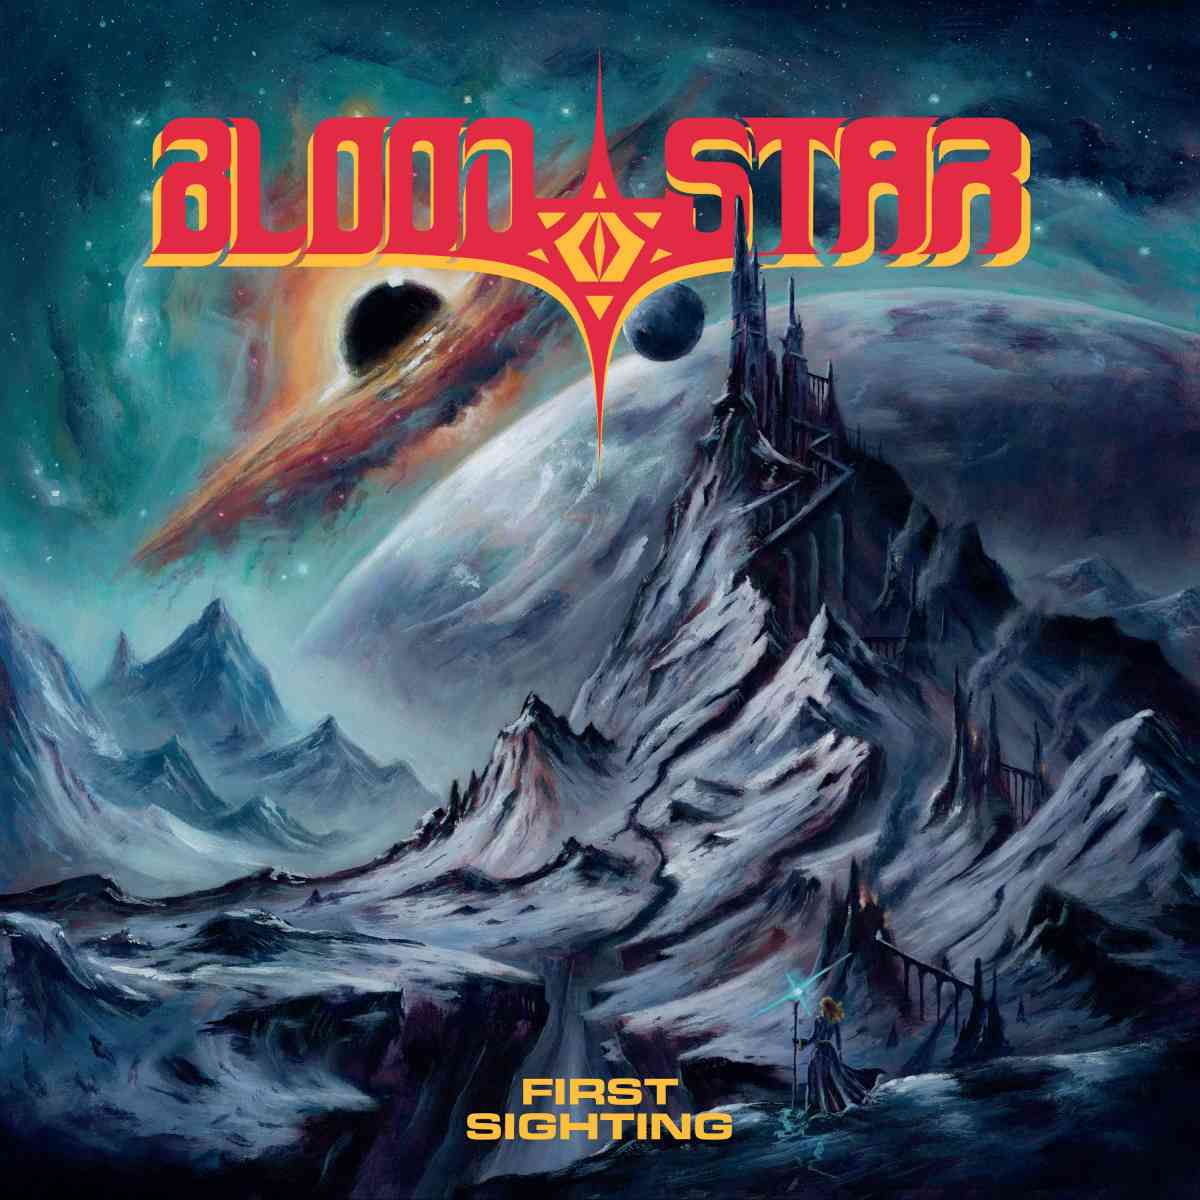 BLOOD STAR - First Sighting - album cover